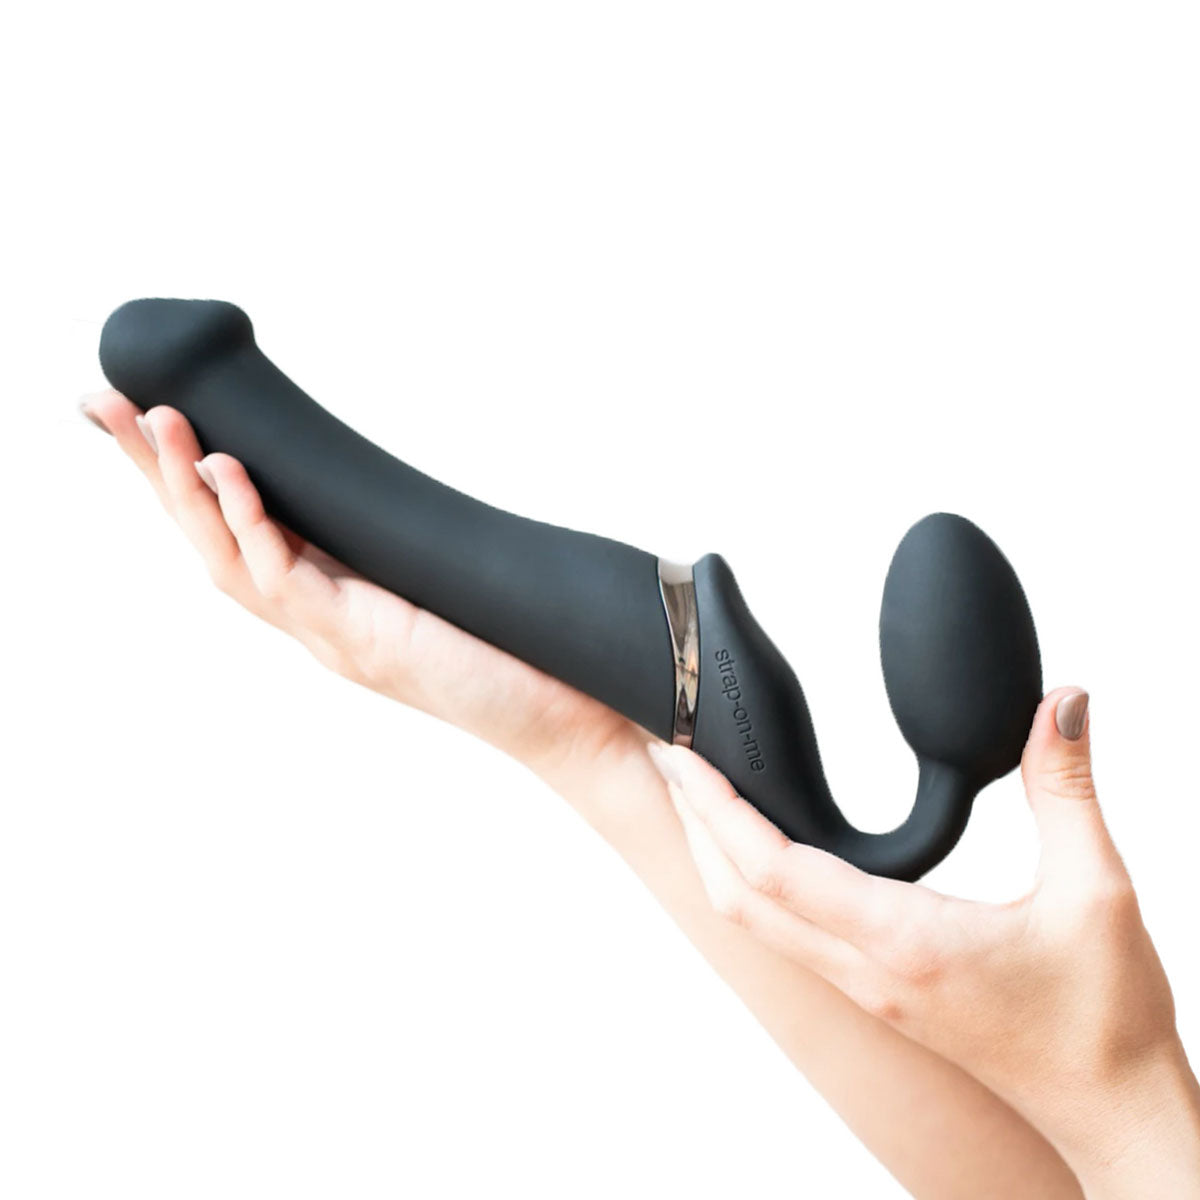 Hands holding a black silicone bendable strap-on with bulb for internal stimulation Nudie Co